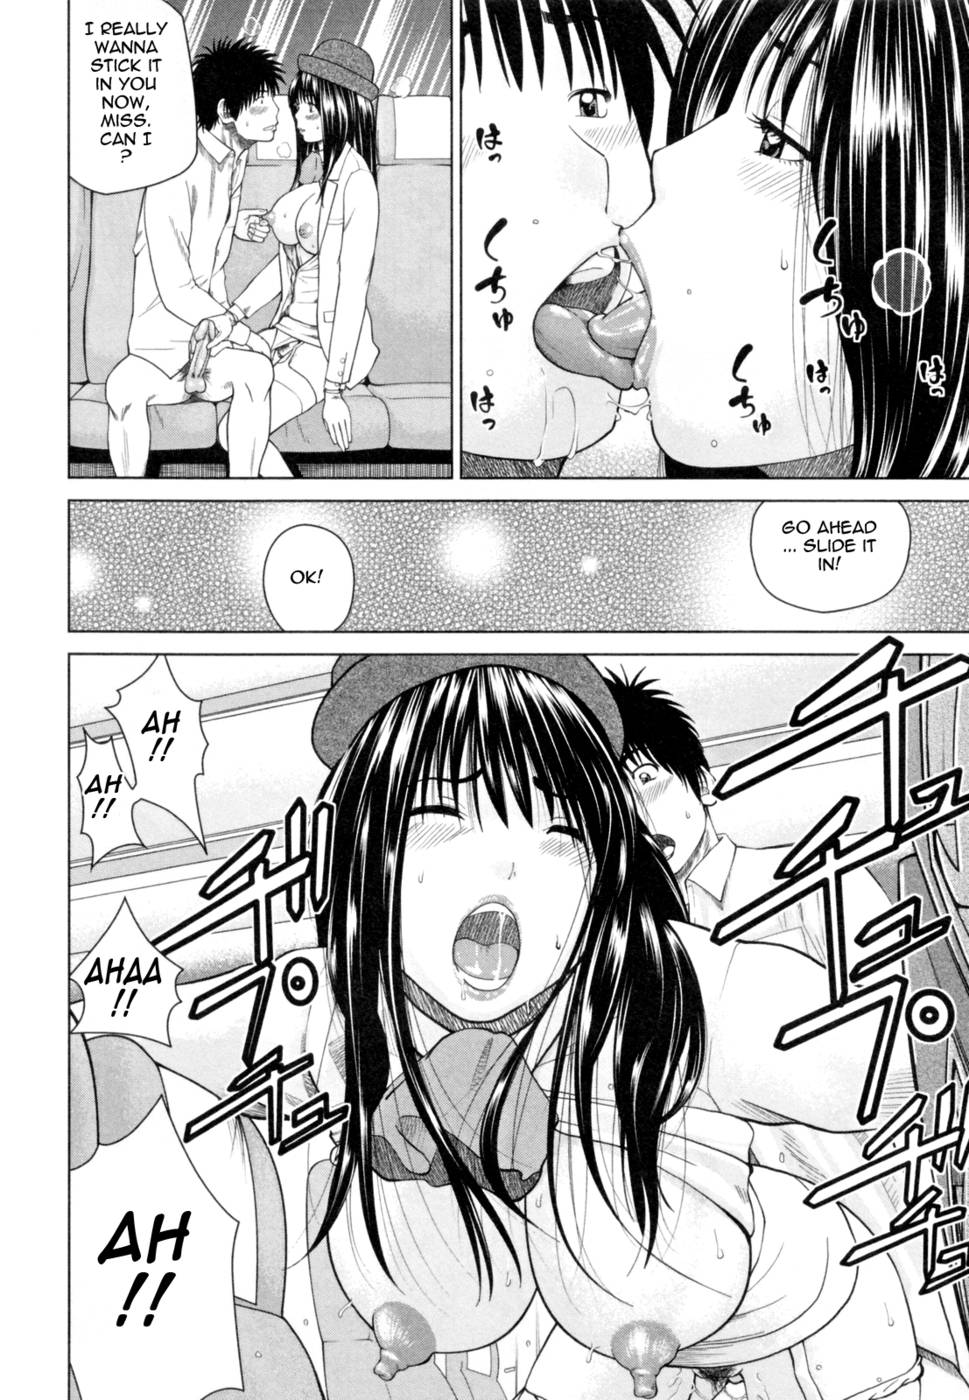 Hentai Manga Comic-32 Year Old Unsatisfied Wife-Chapter 6-Uniforms Bus Tour Guide-16